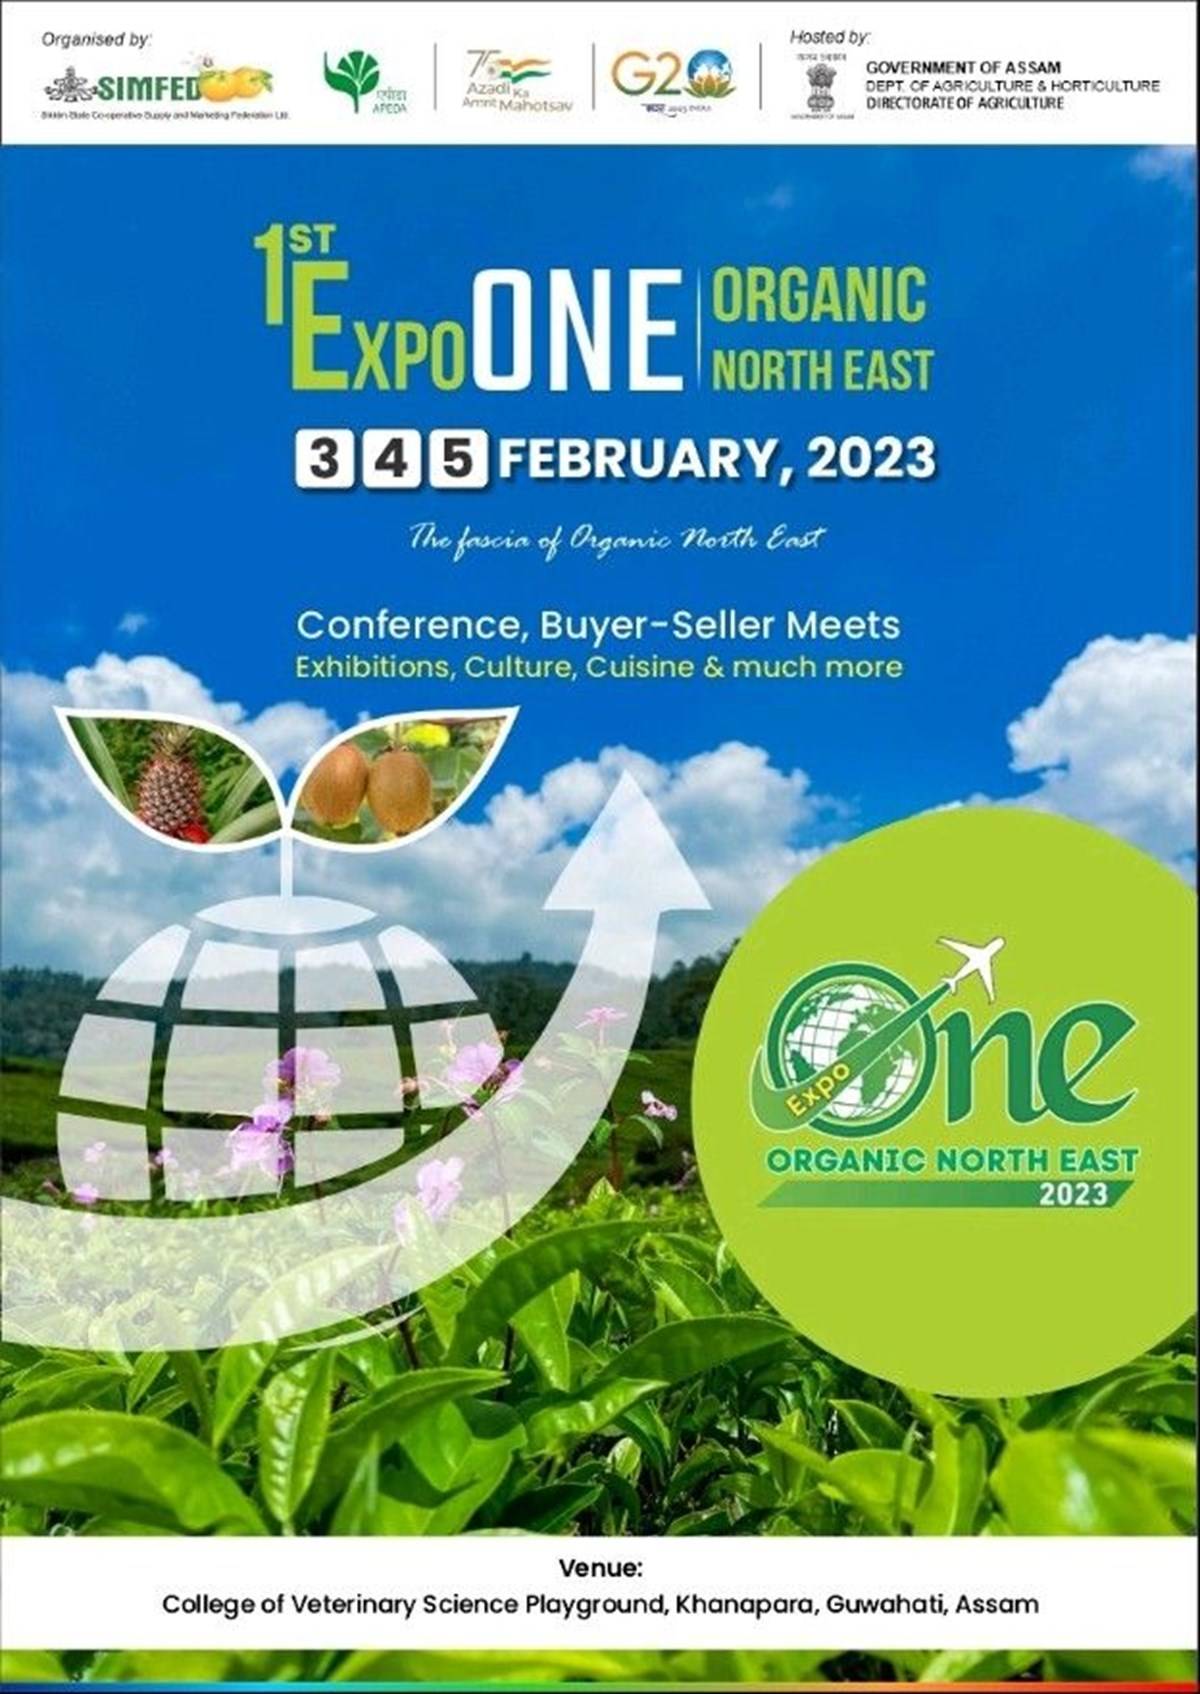 Over 160 organic and natural brand booths will showcase a variety of organic food and non-food products.